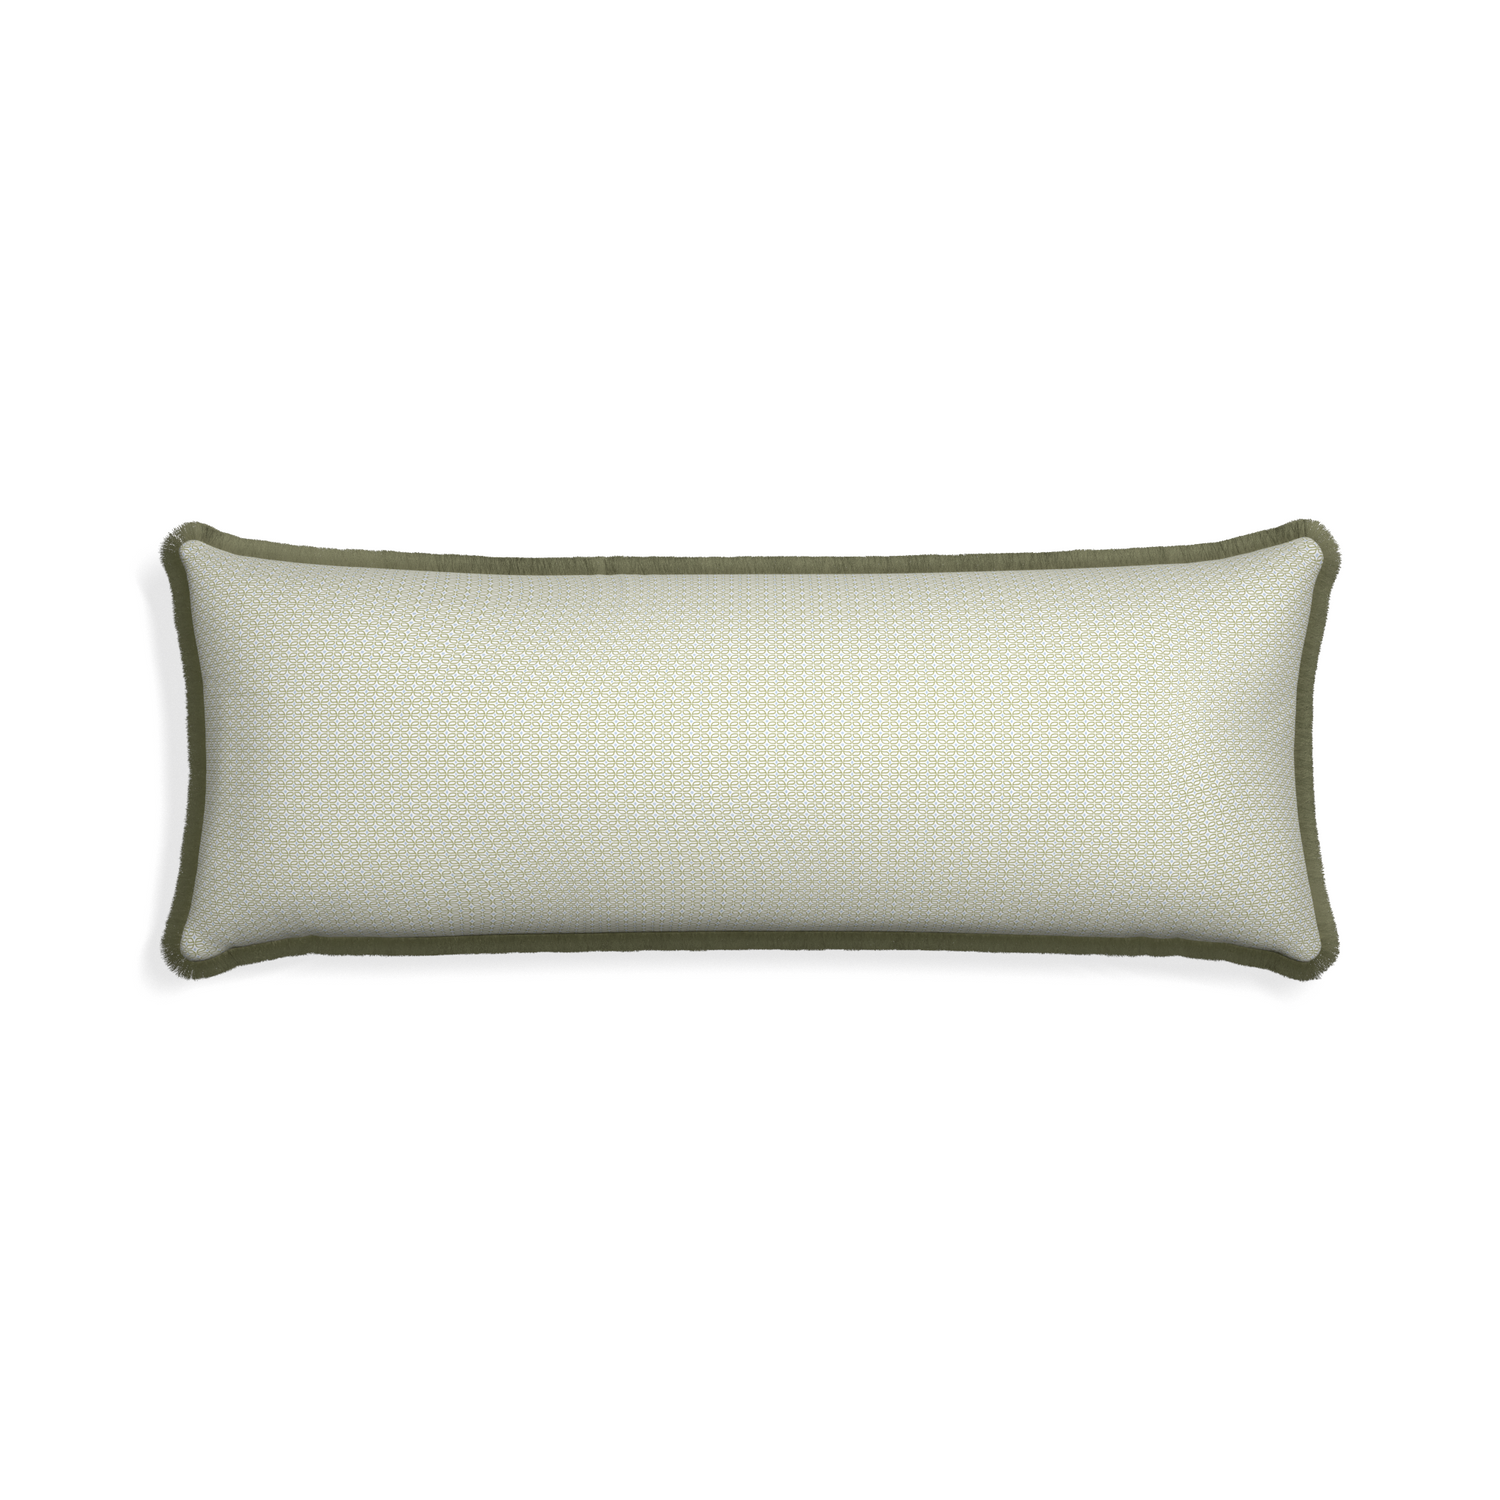 Xl-lumbar loomi moss custom pillow with sage fringe on white background